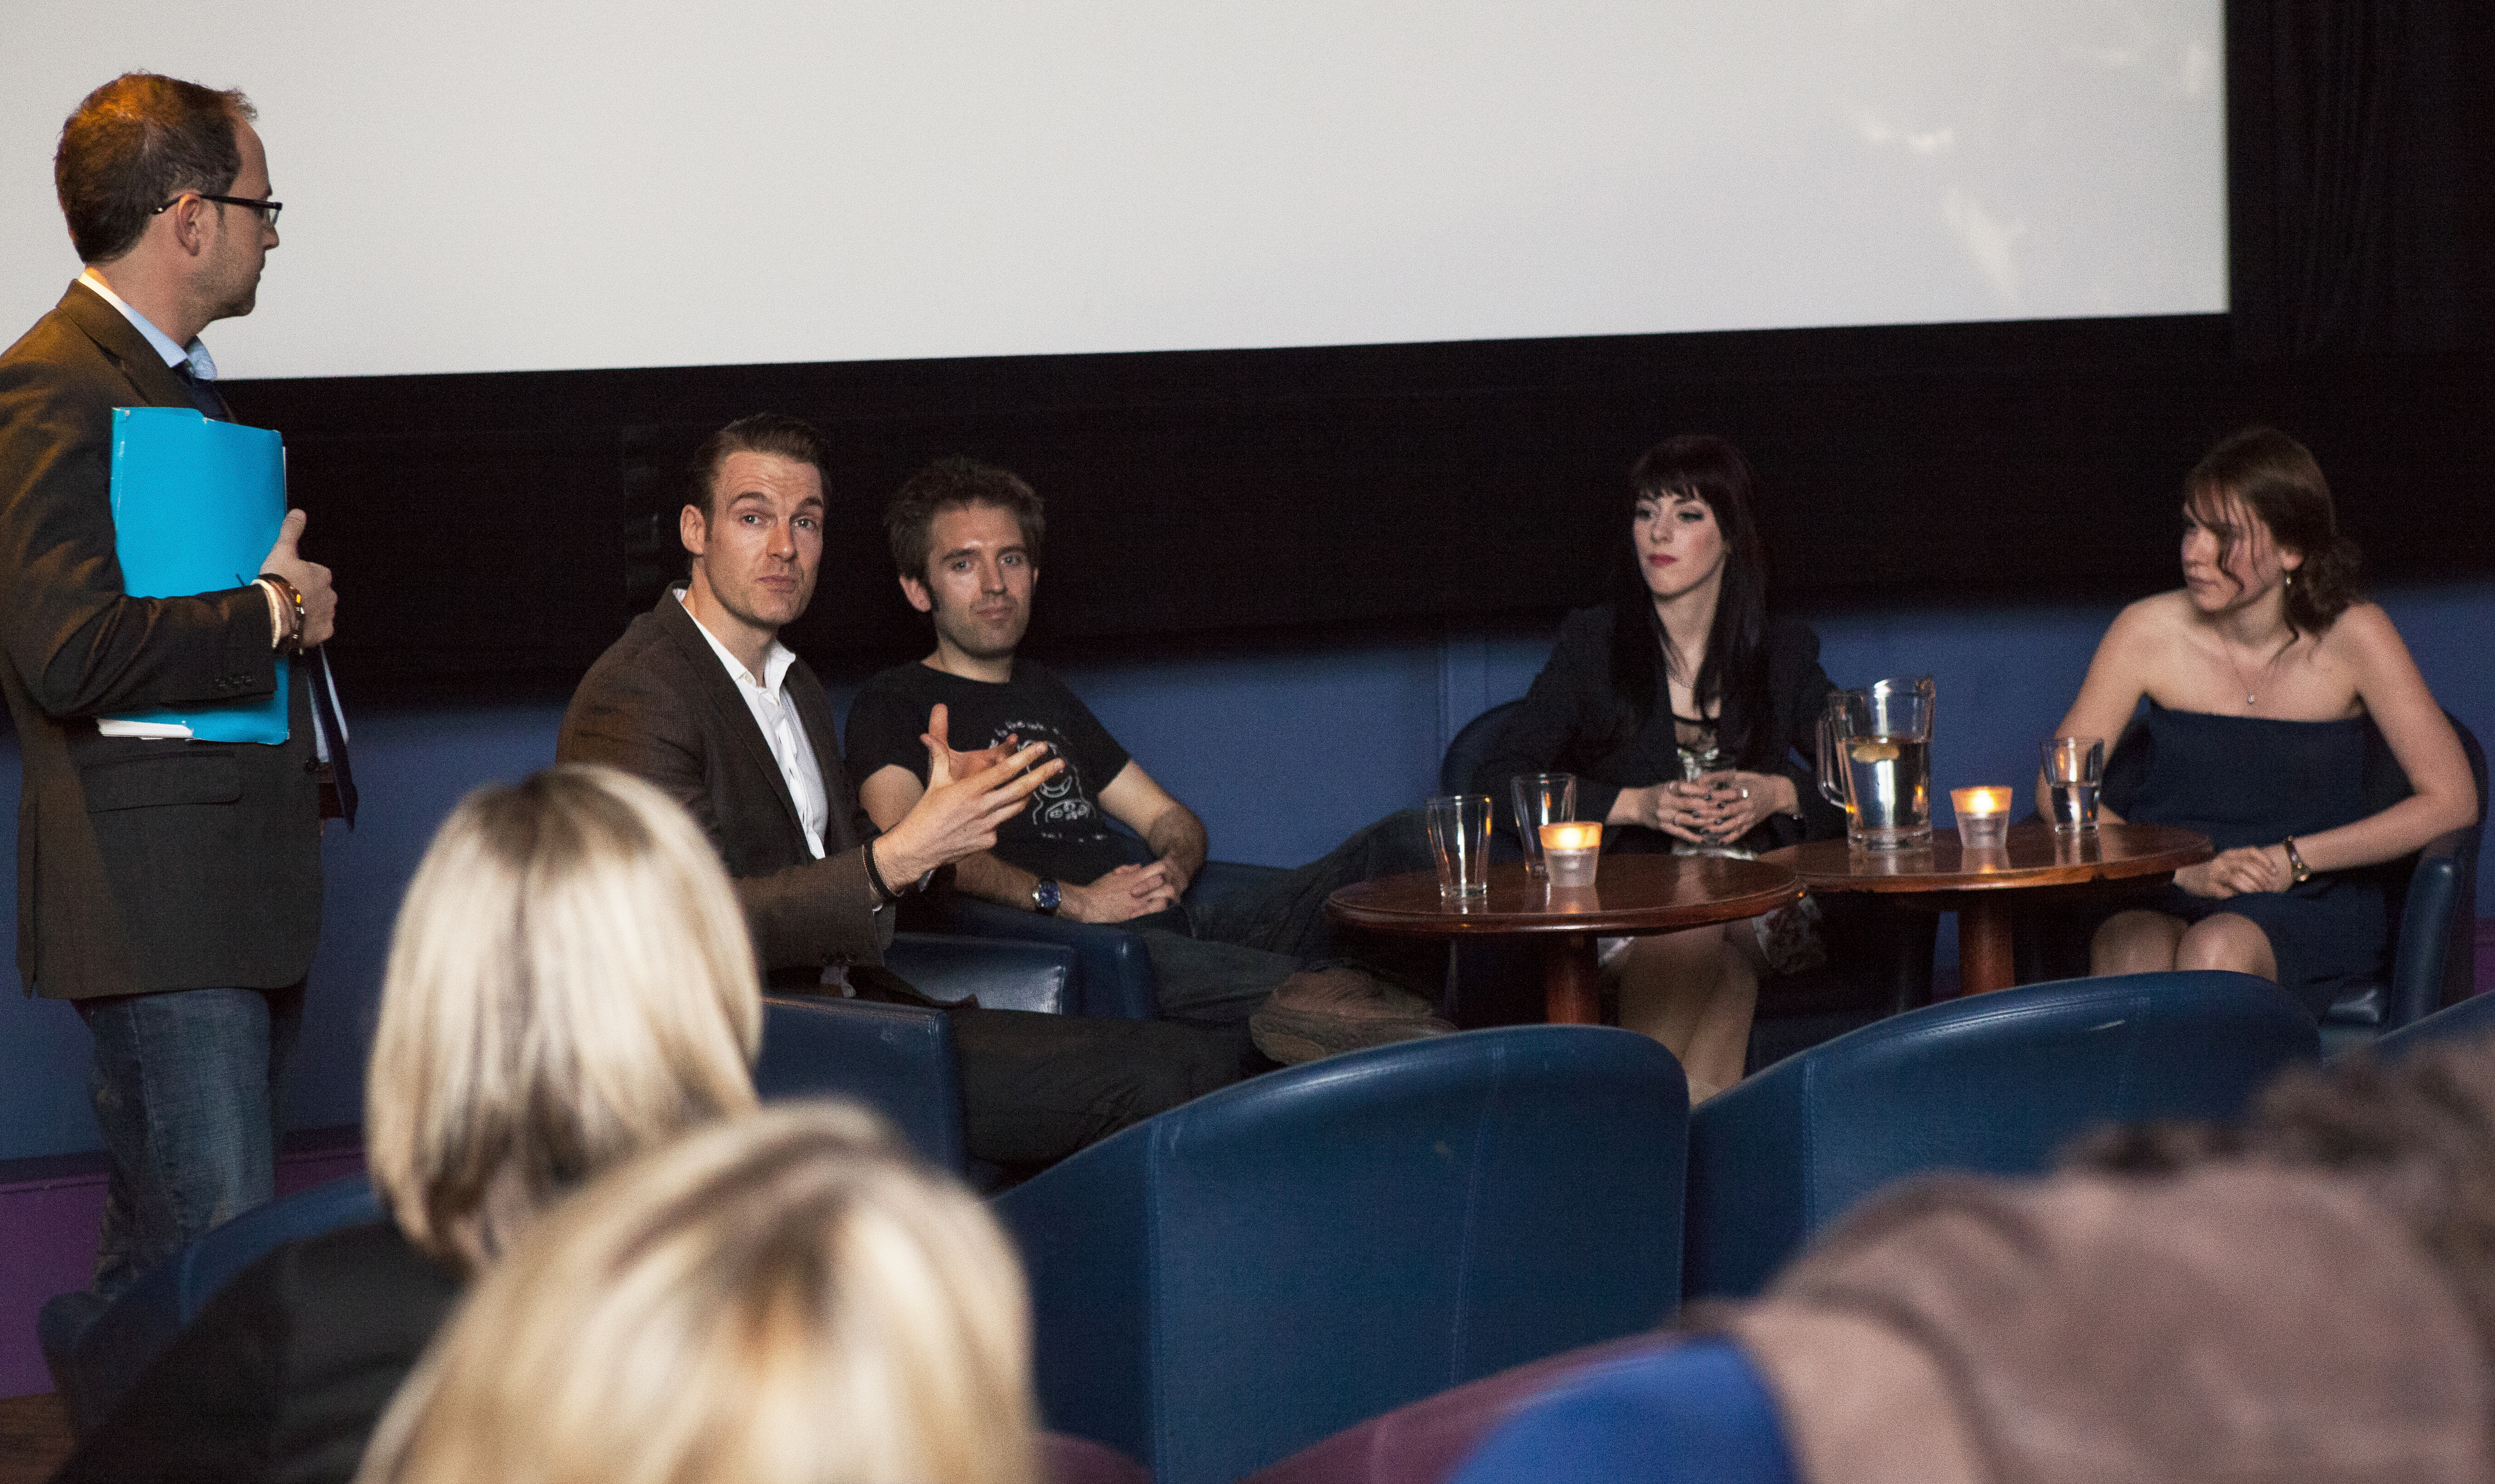 Sophie Black with the Q&A panel at the Ashes (2013) London premiere